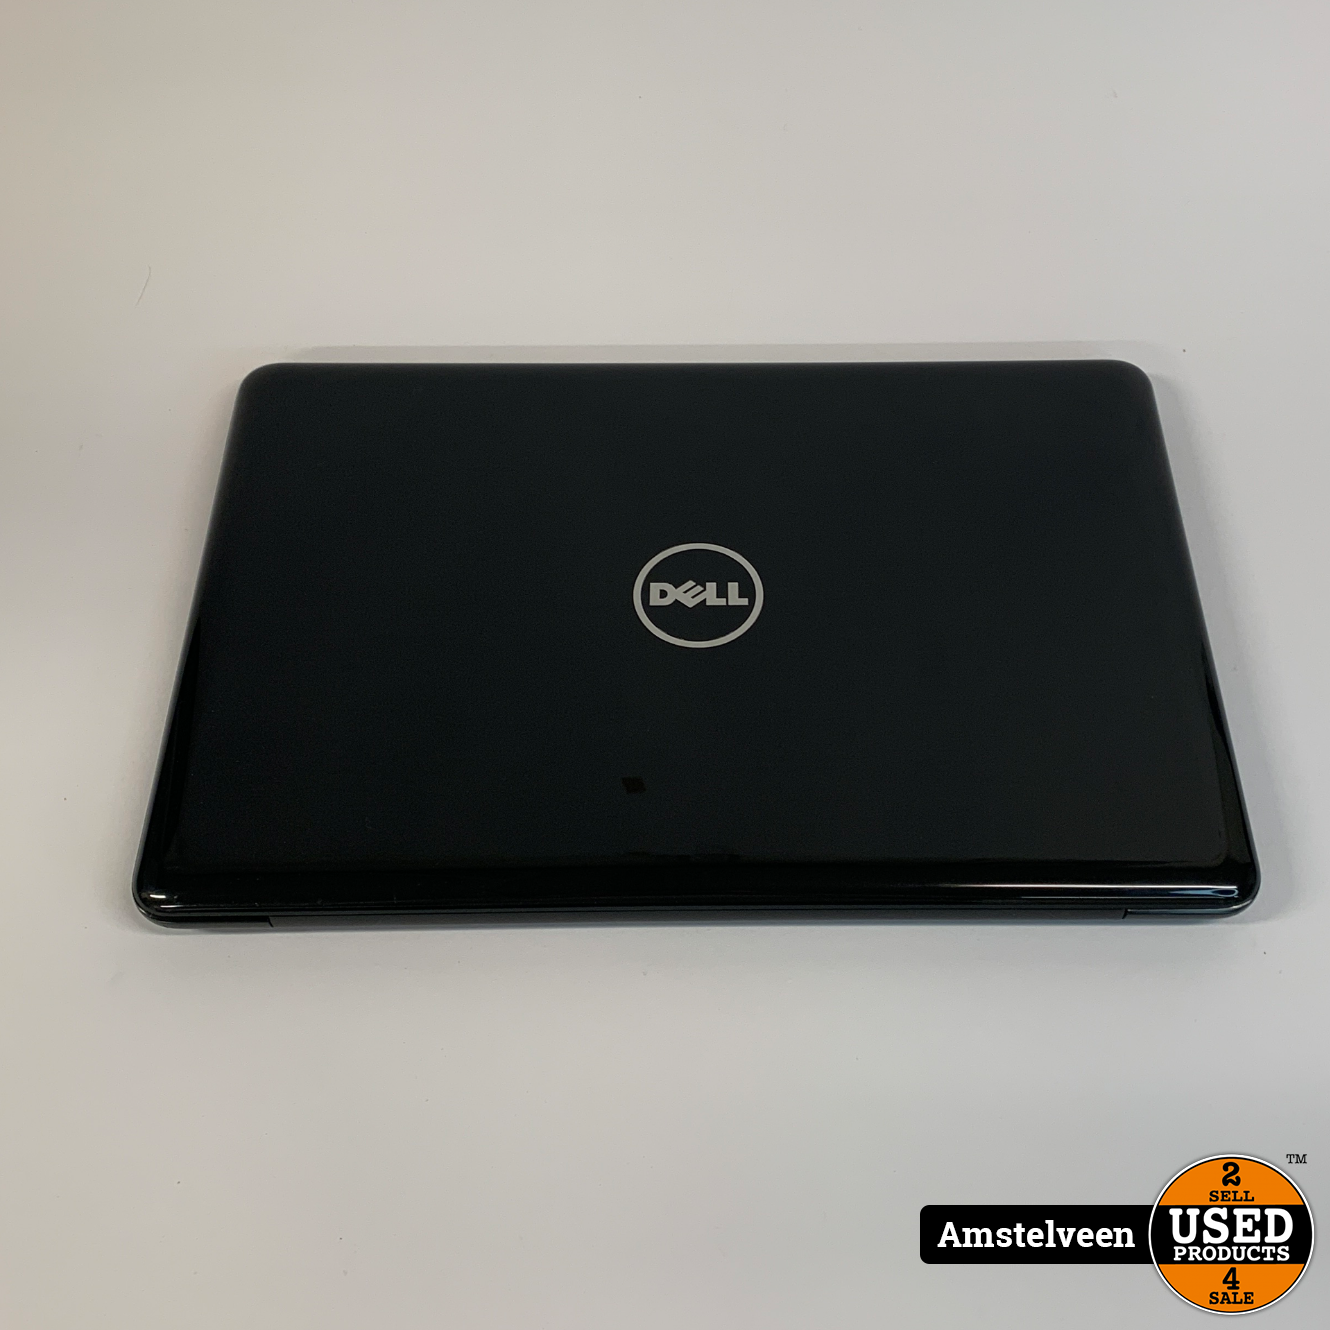 inspiron 15.6-inch Laptop | 4GB i5 HDD | Nette Staat - Used Amstelveen